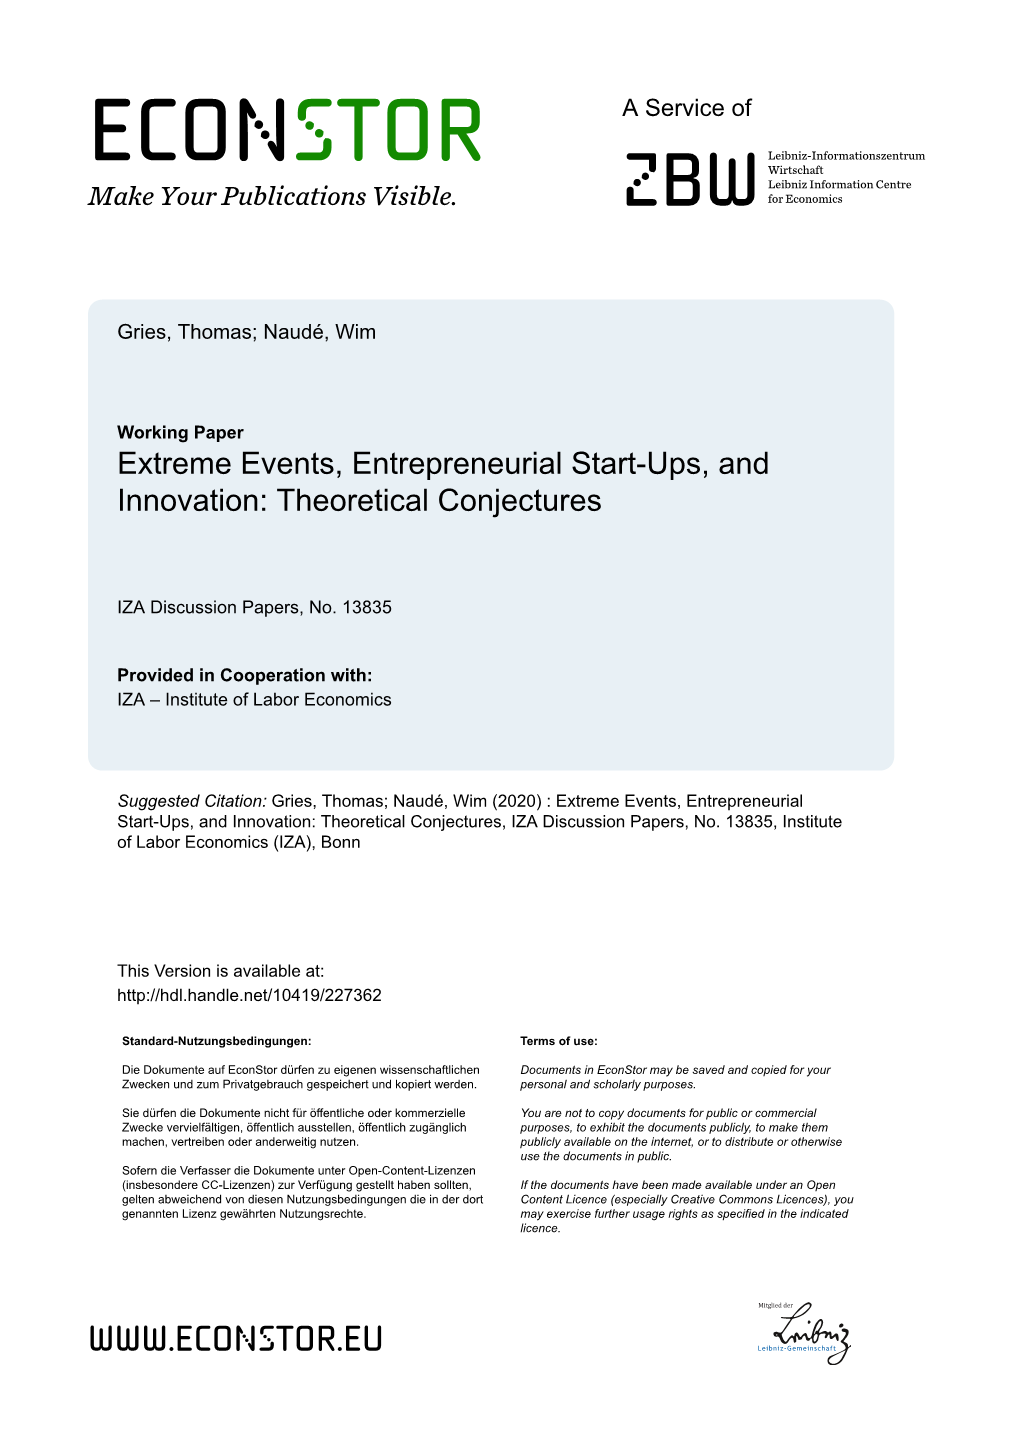 Extreme Events, Entrepreneurial Start-Ups, and Innovation: Theoretical Conjectures